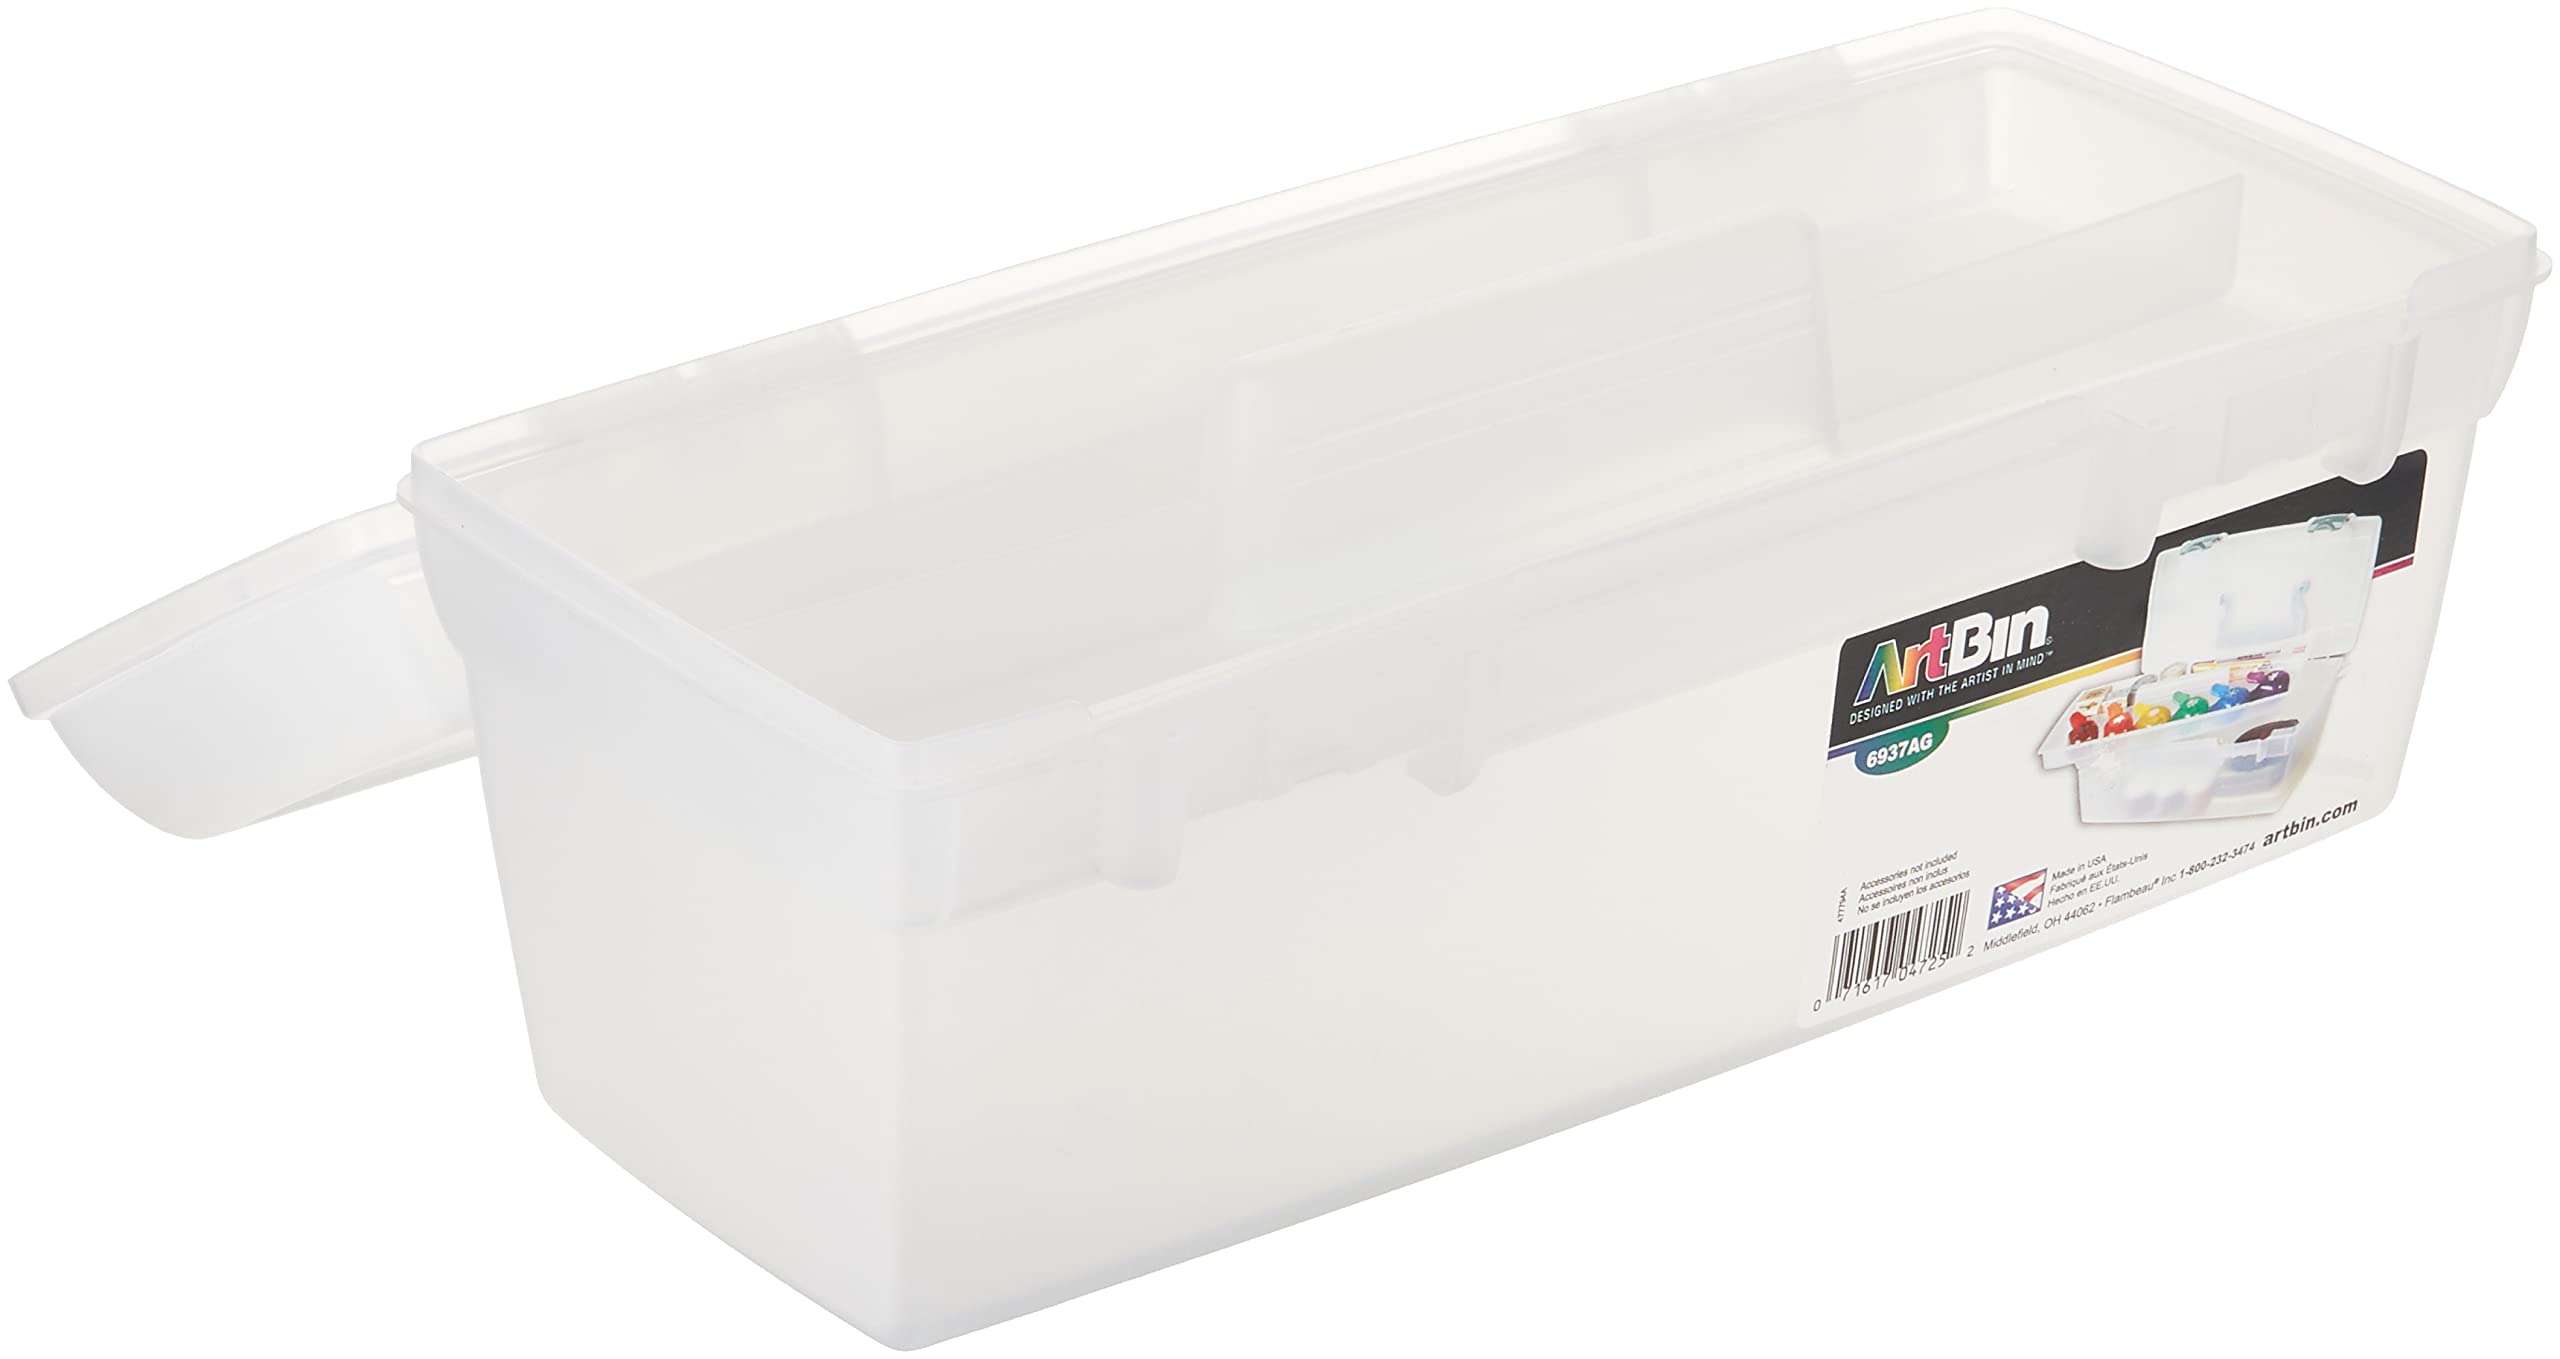 ArtBin 6937AG Essentials Lift-Out Tray Box, Portable Art & Craft Organizer with Handle and Tray, Clear/Aqua